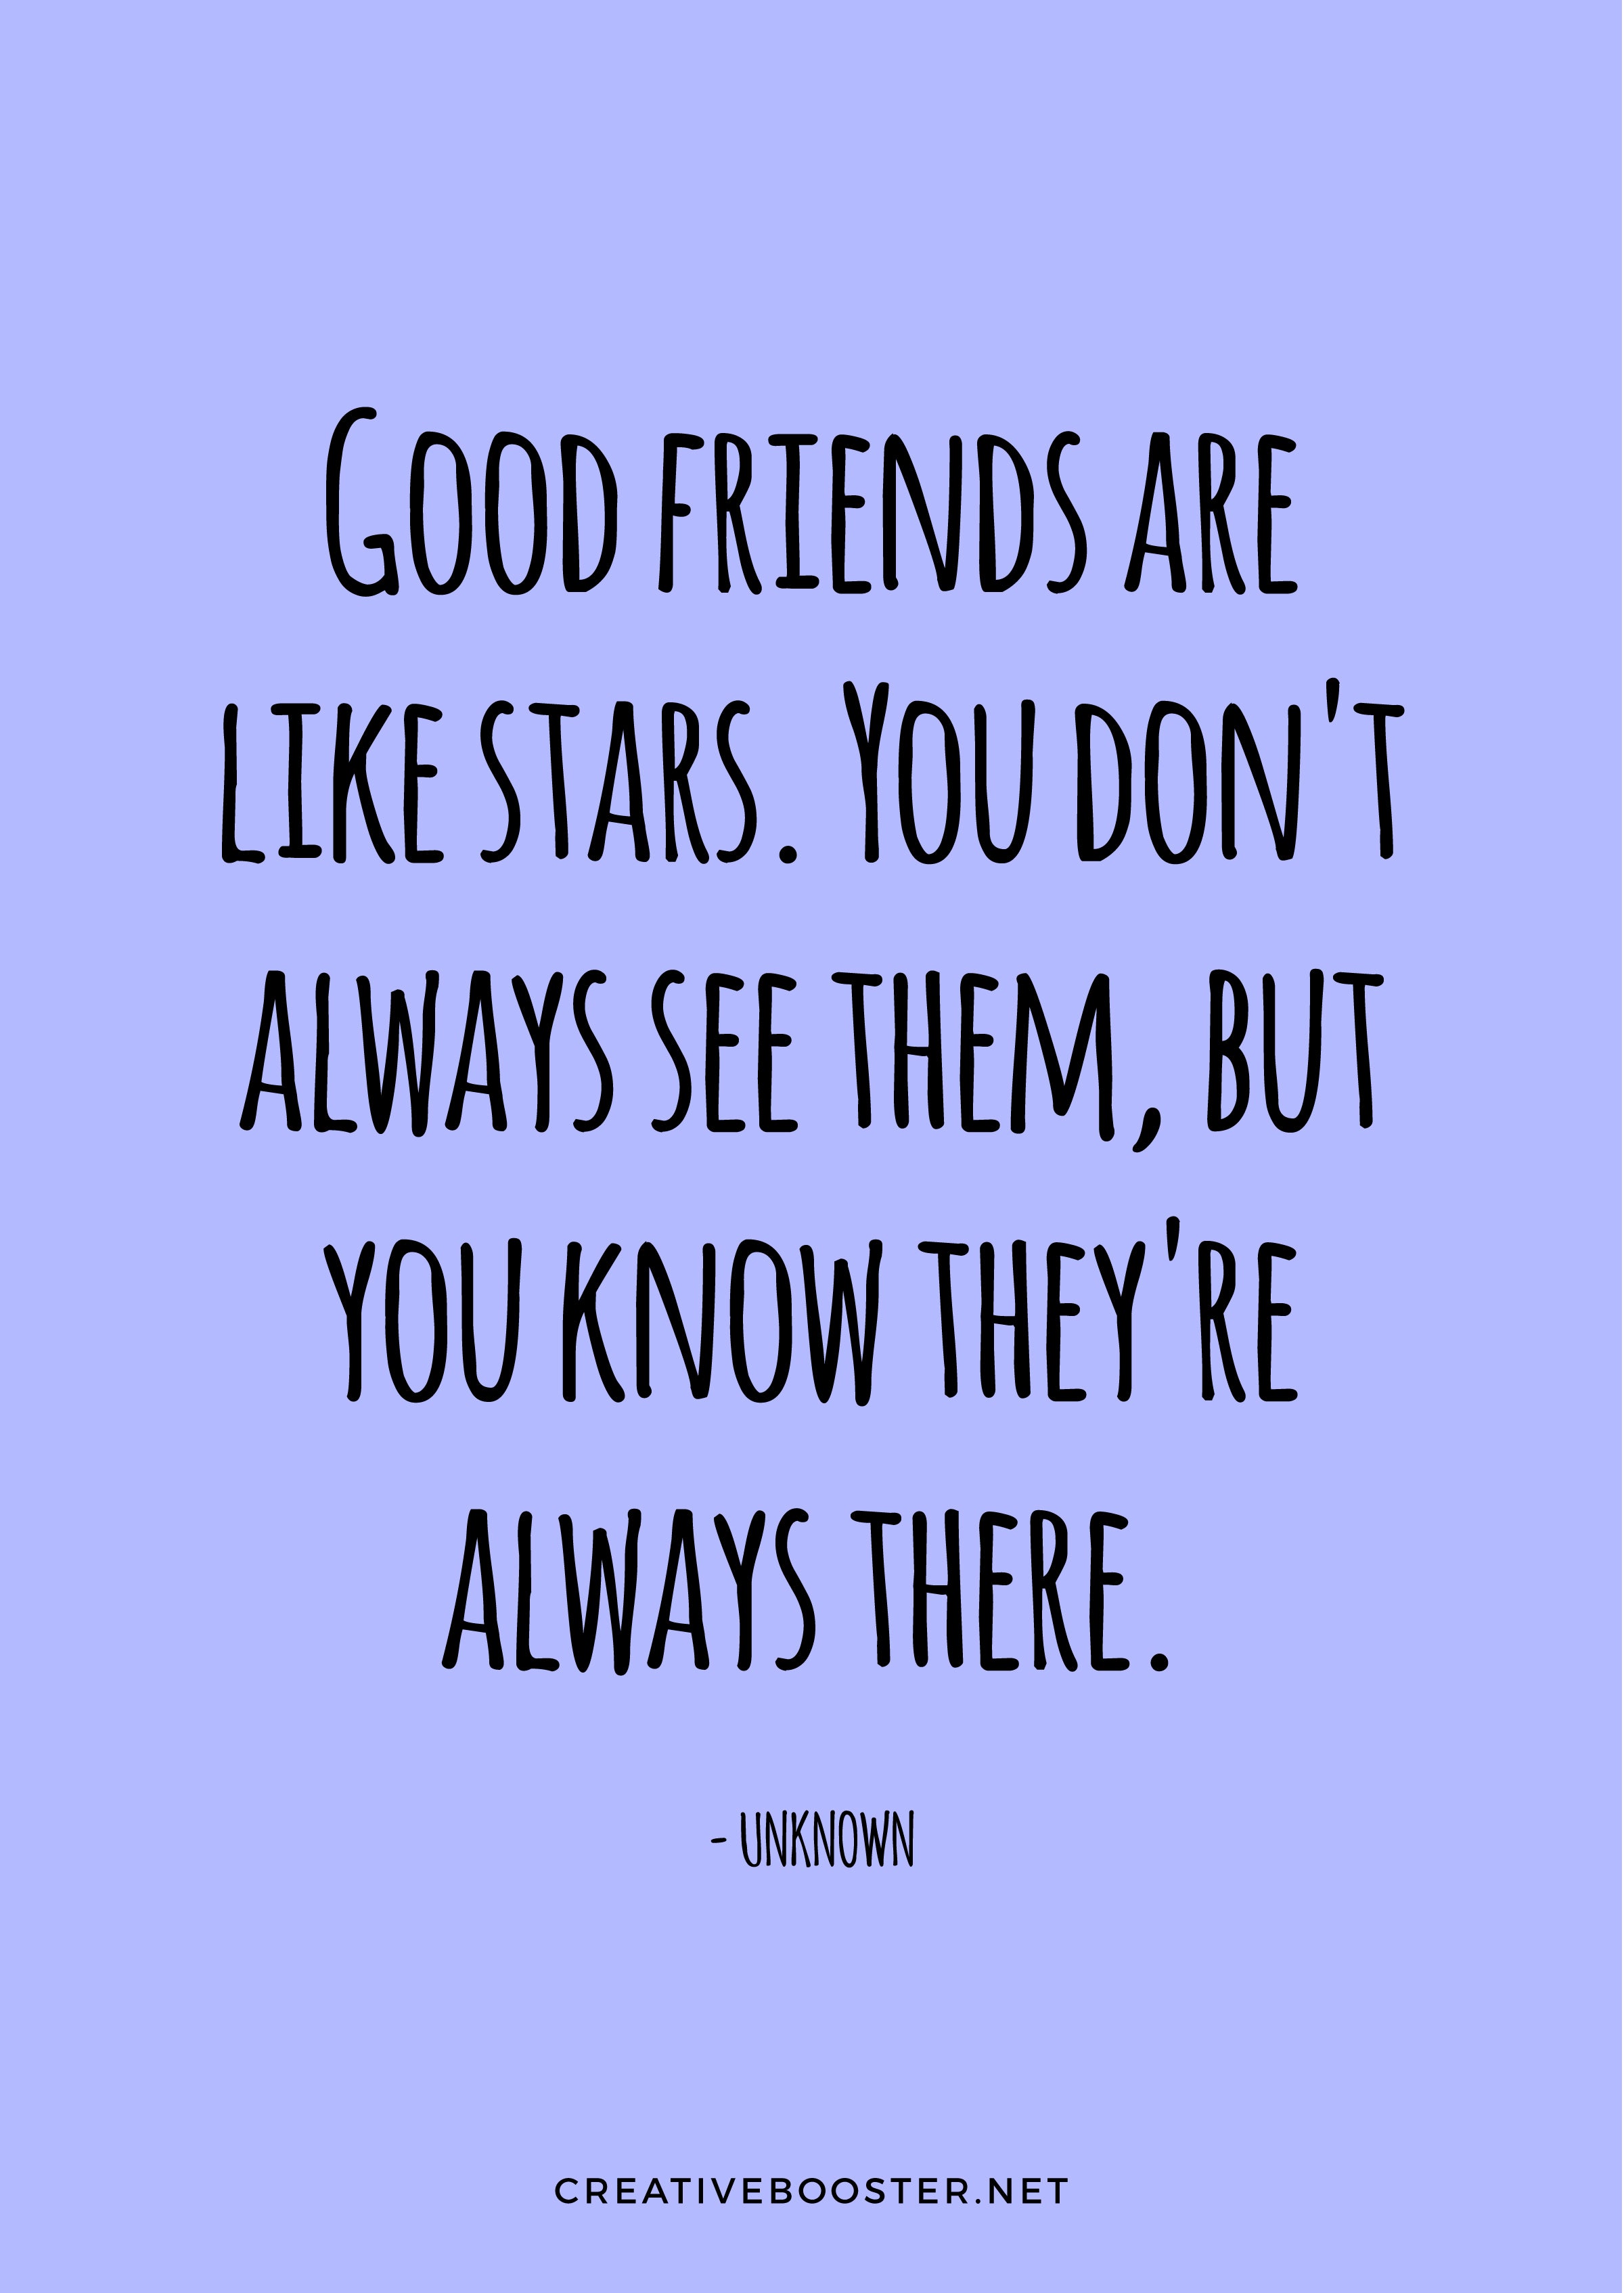 "Good friends are like stars. You don't always see them, but you know they're always there." — Unknown